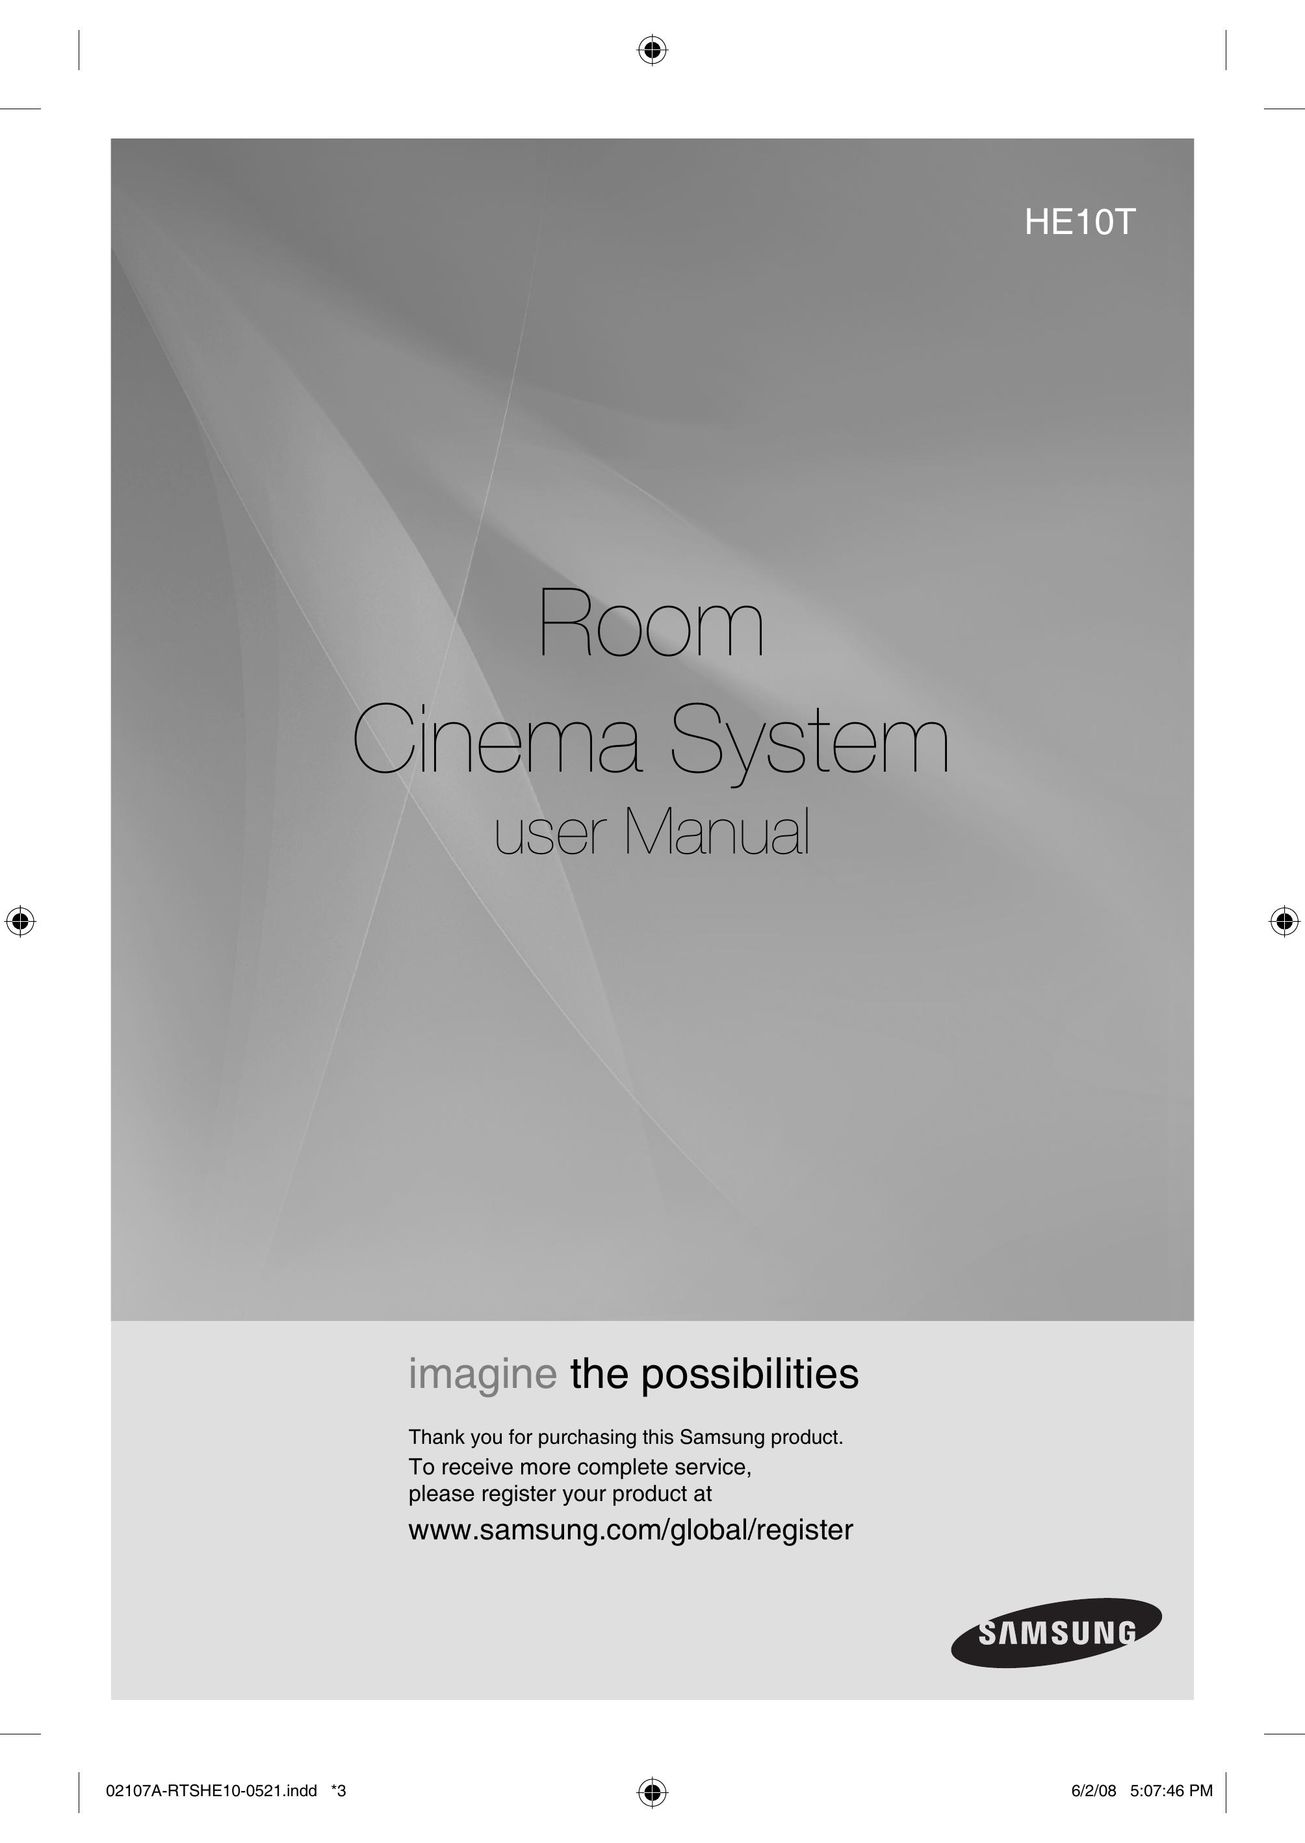 Samsung HE10T Home Theater System User Manual